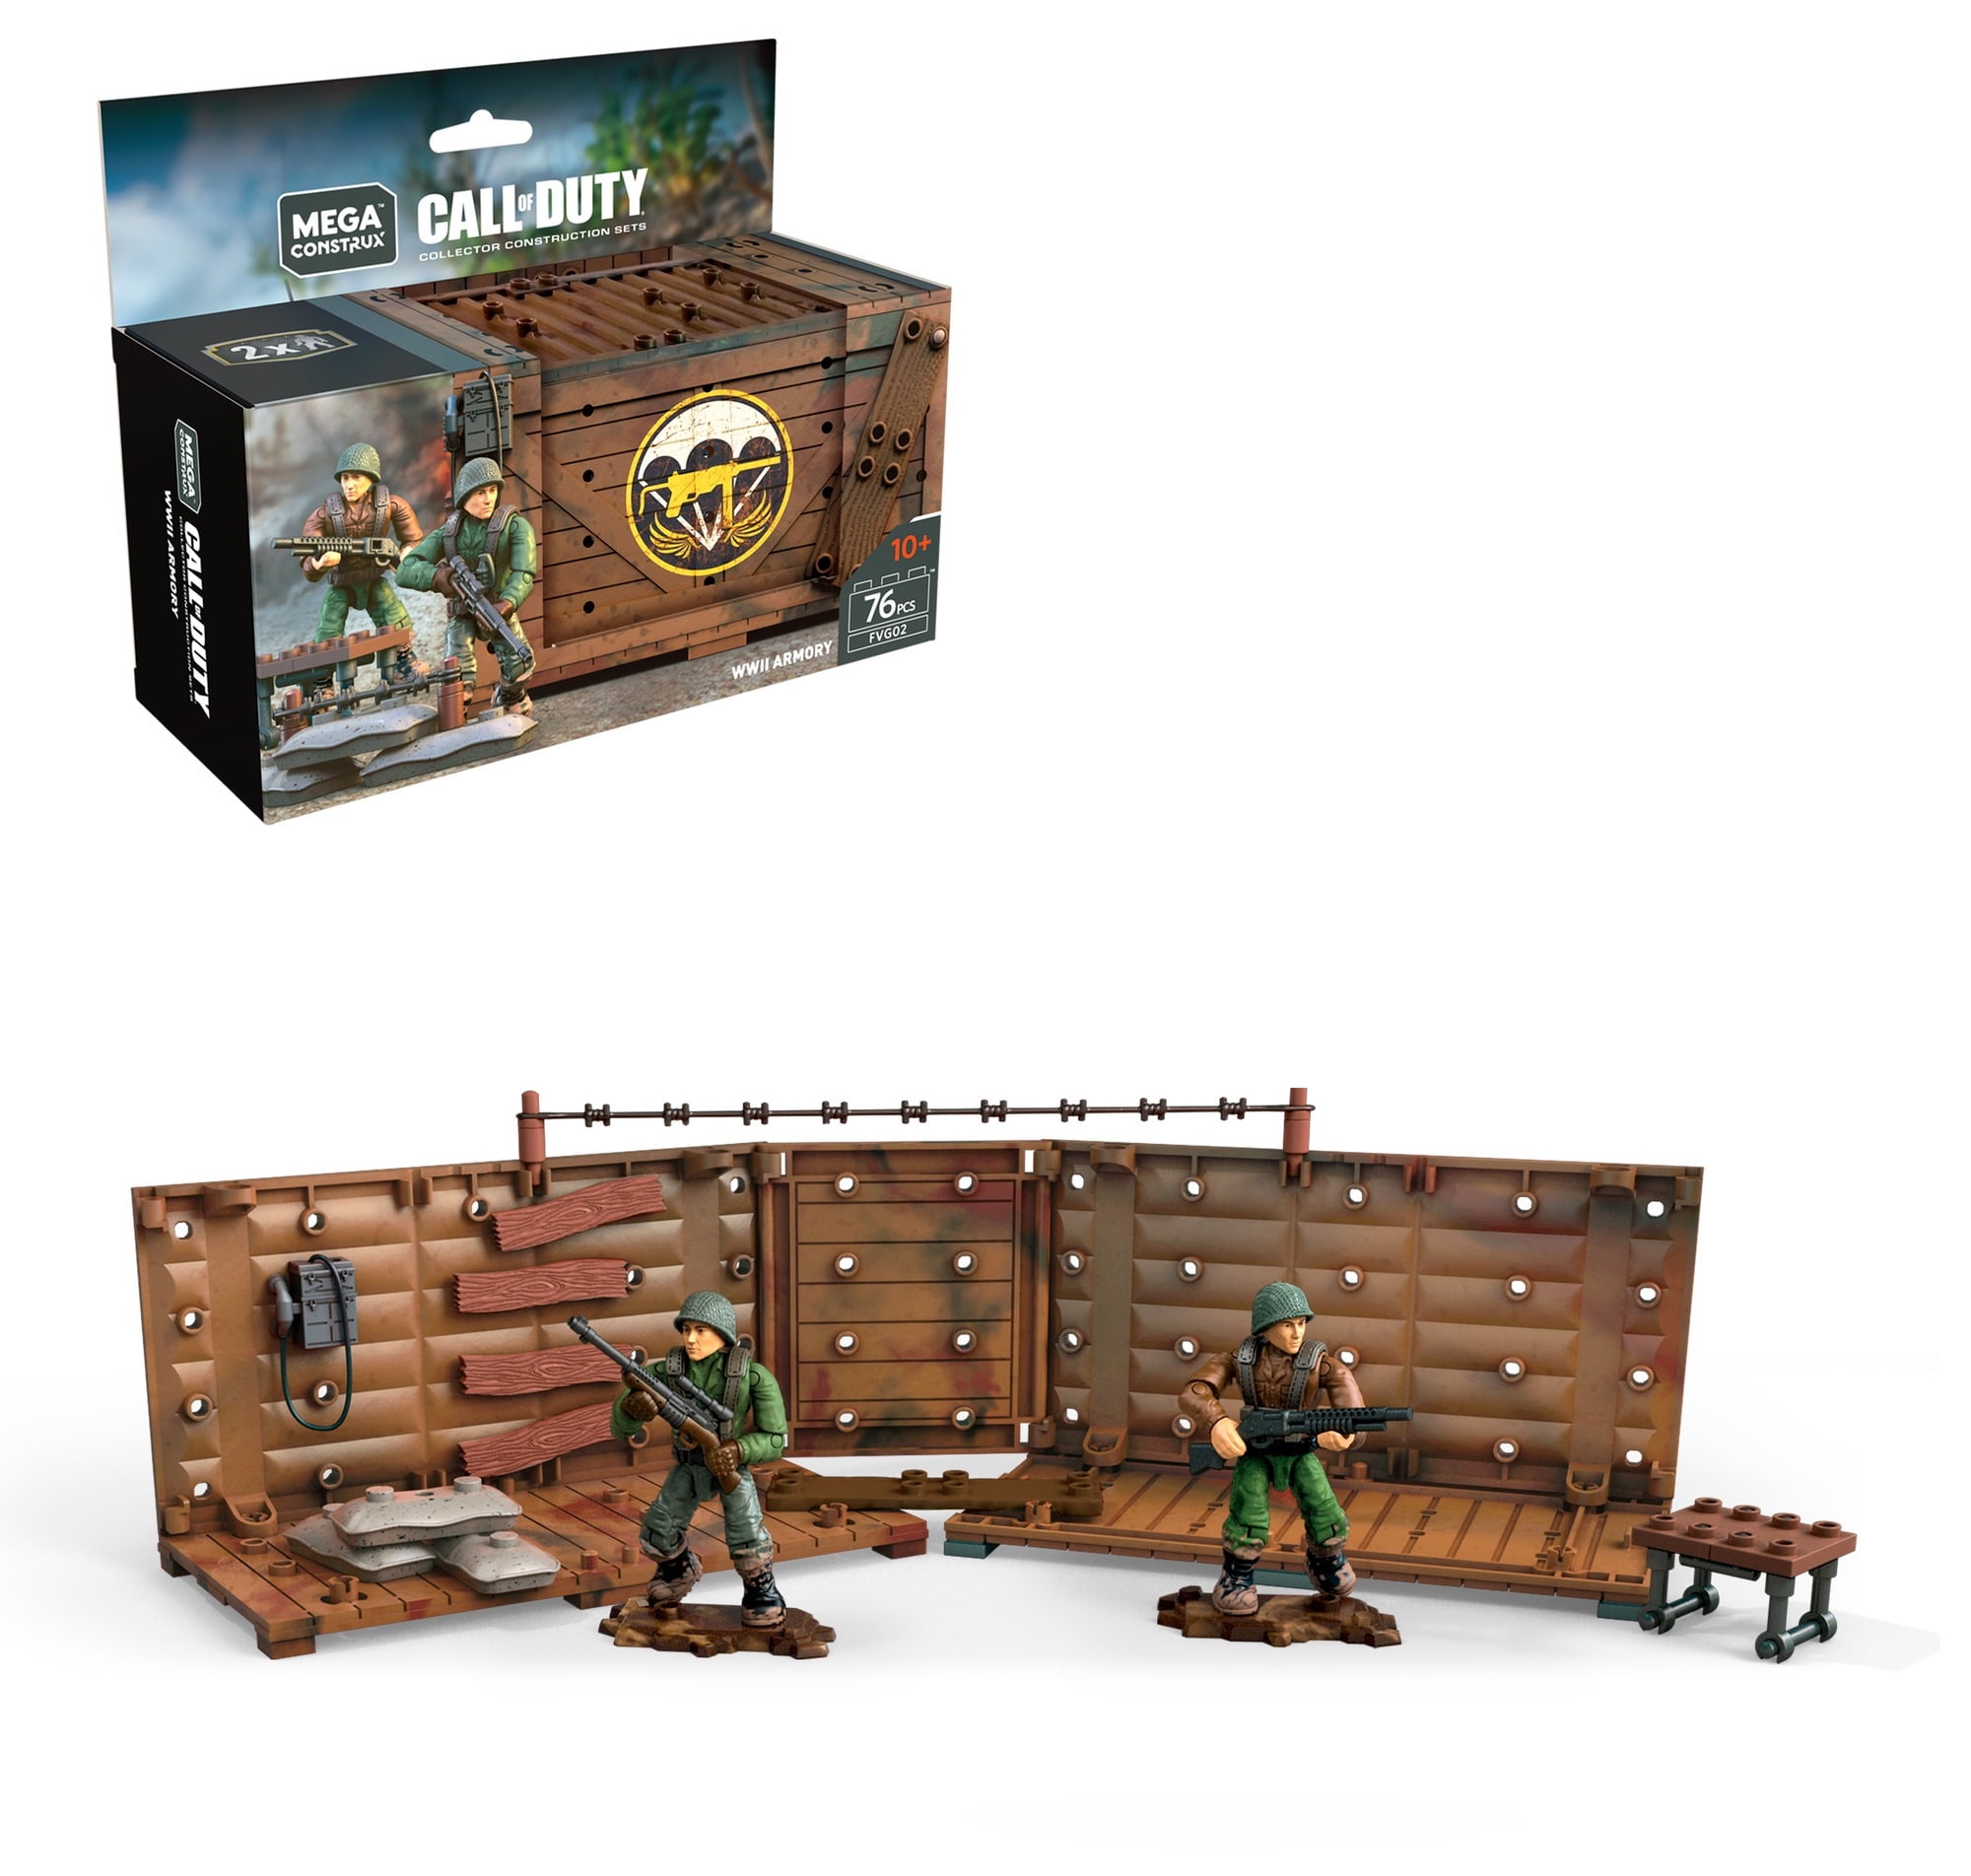 Tarif foran prototype Mega Construx Call of Duty WWII Armory Construction Set with character  figures, Building Toys for Collectors (76 Pieces) - Walmart.com